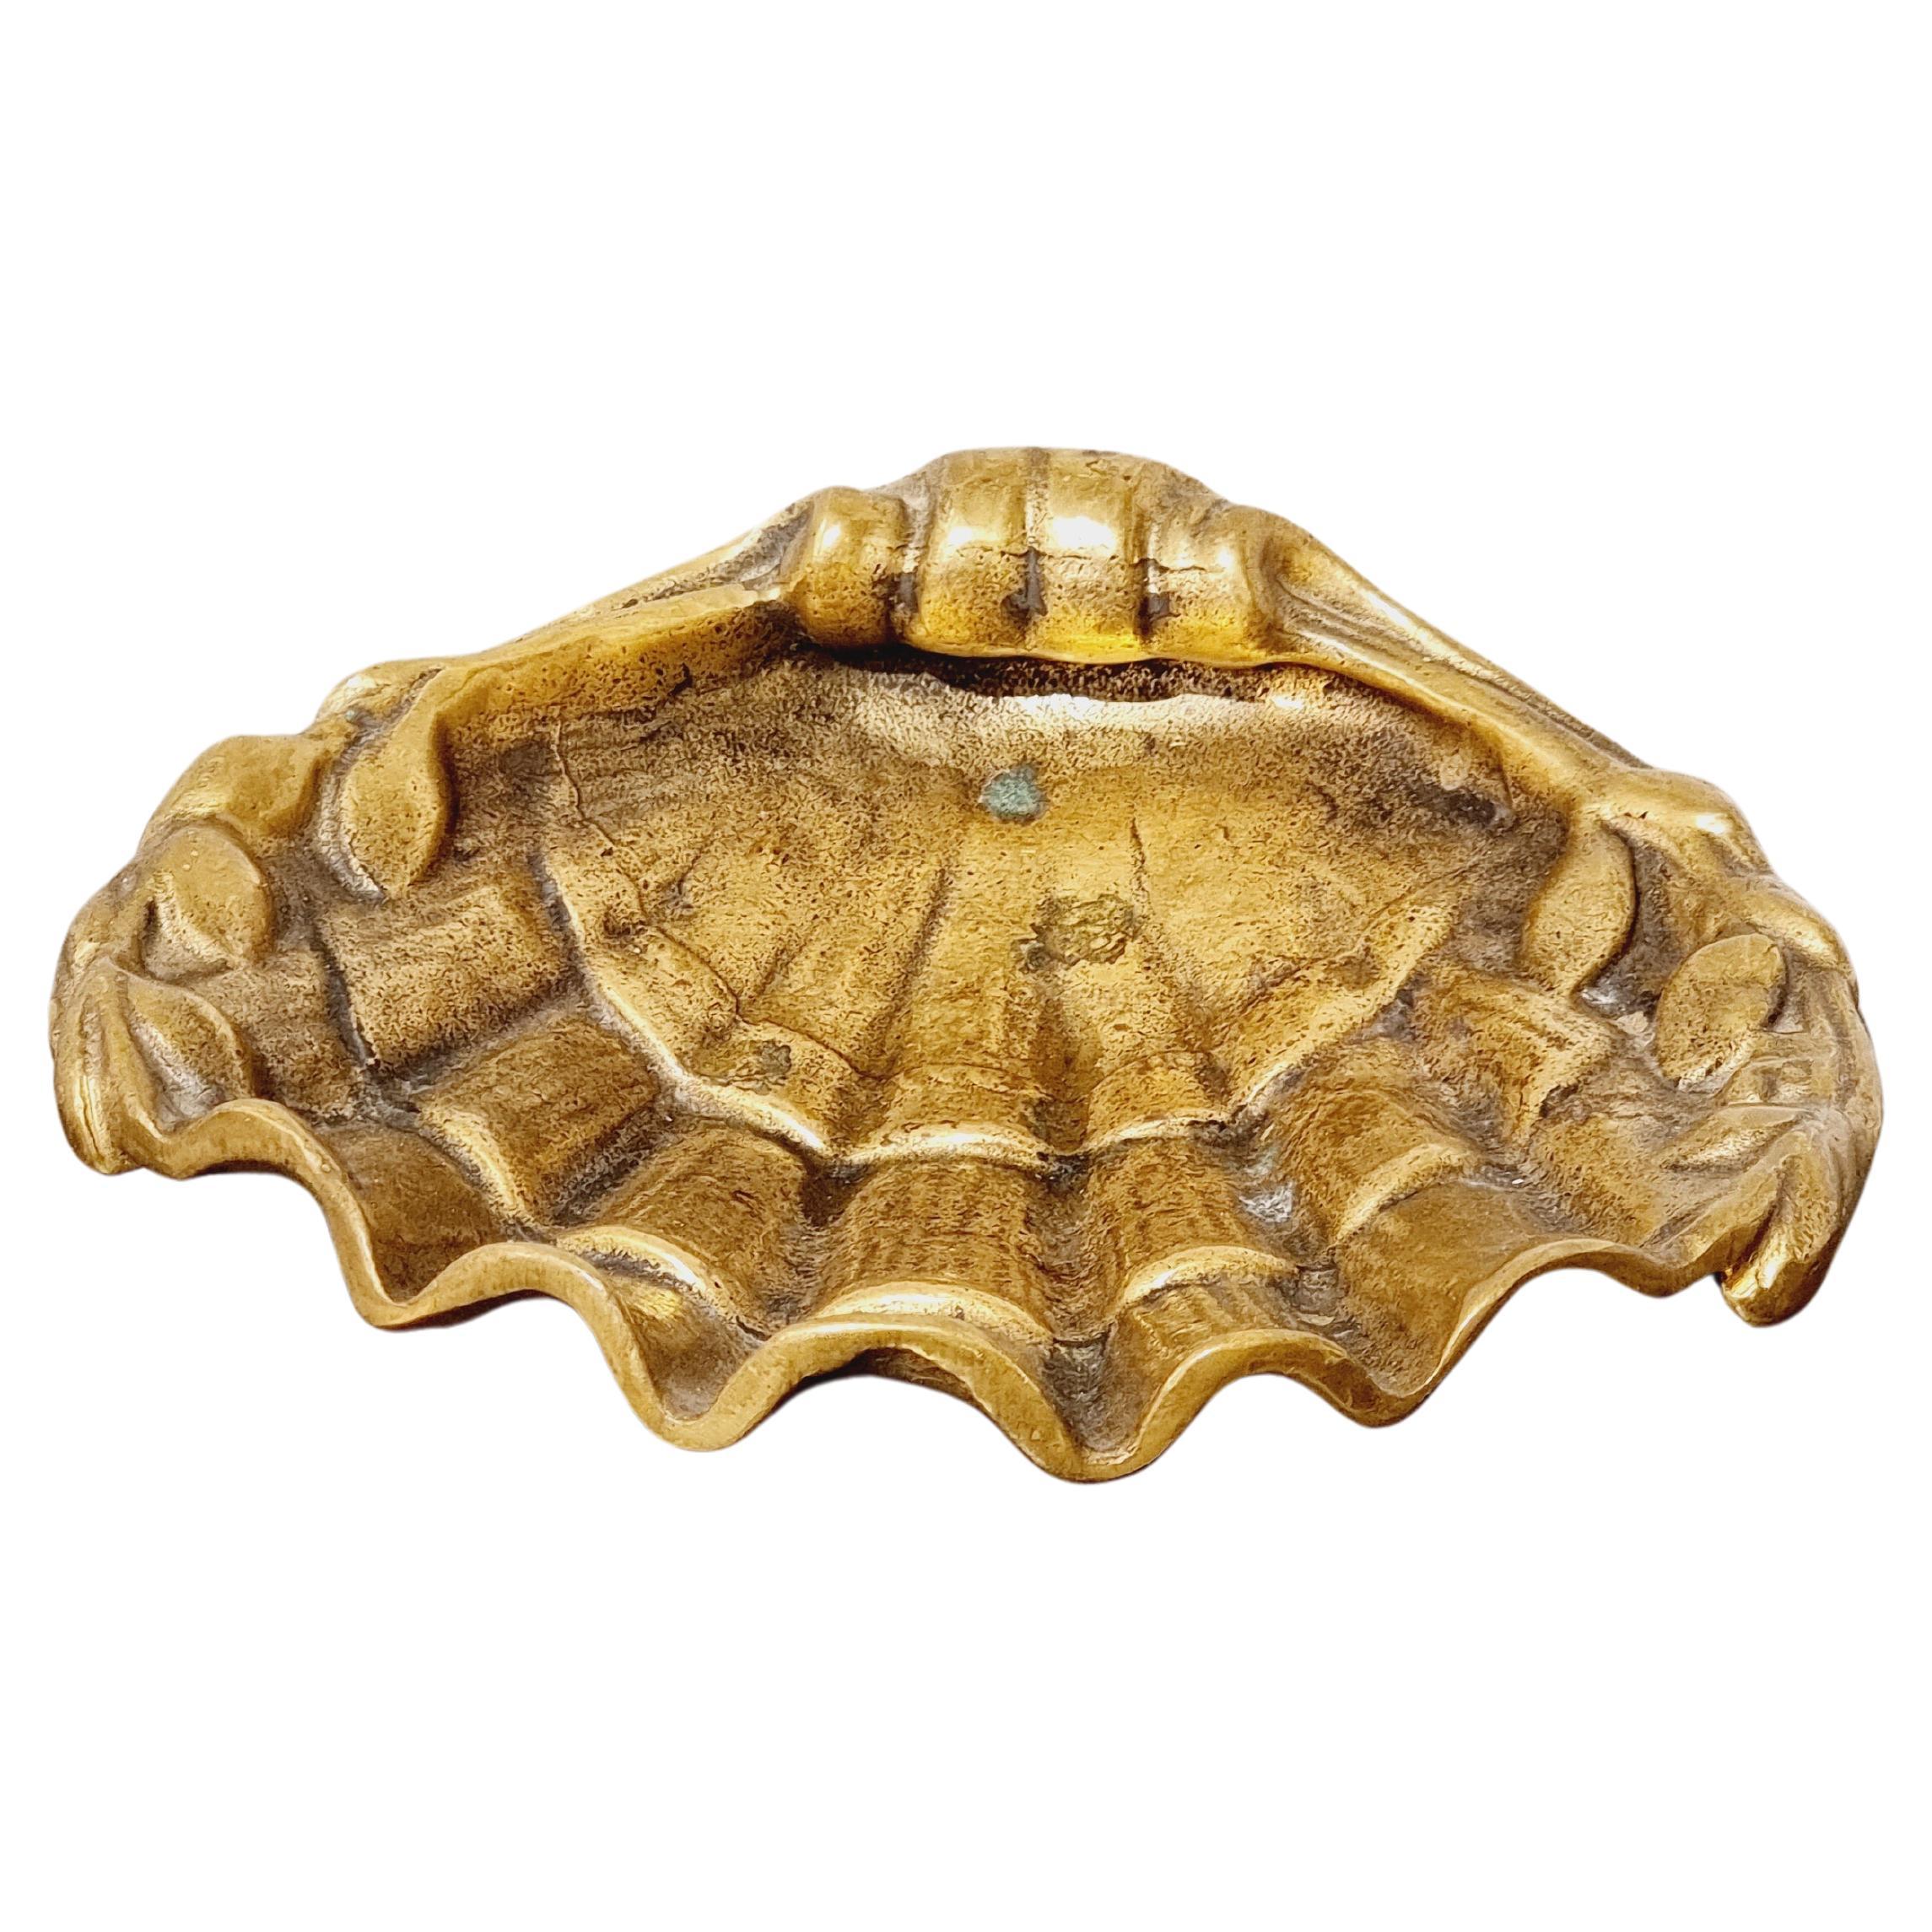 Solid bronze plate in shape of shell, french early 1900s